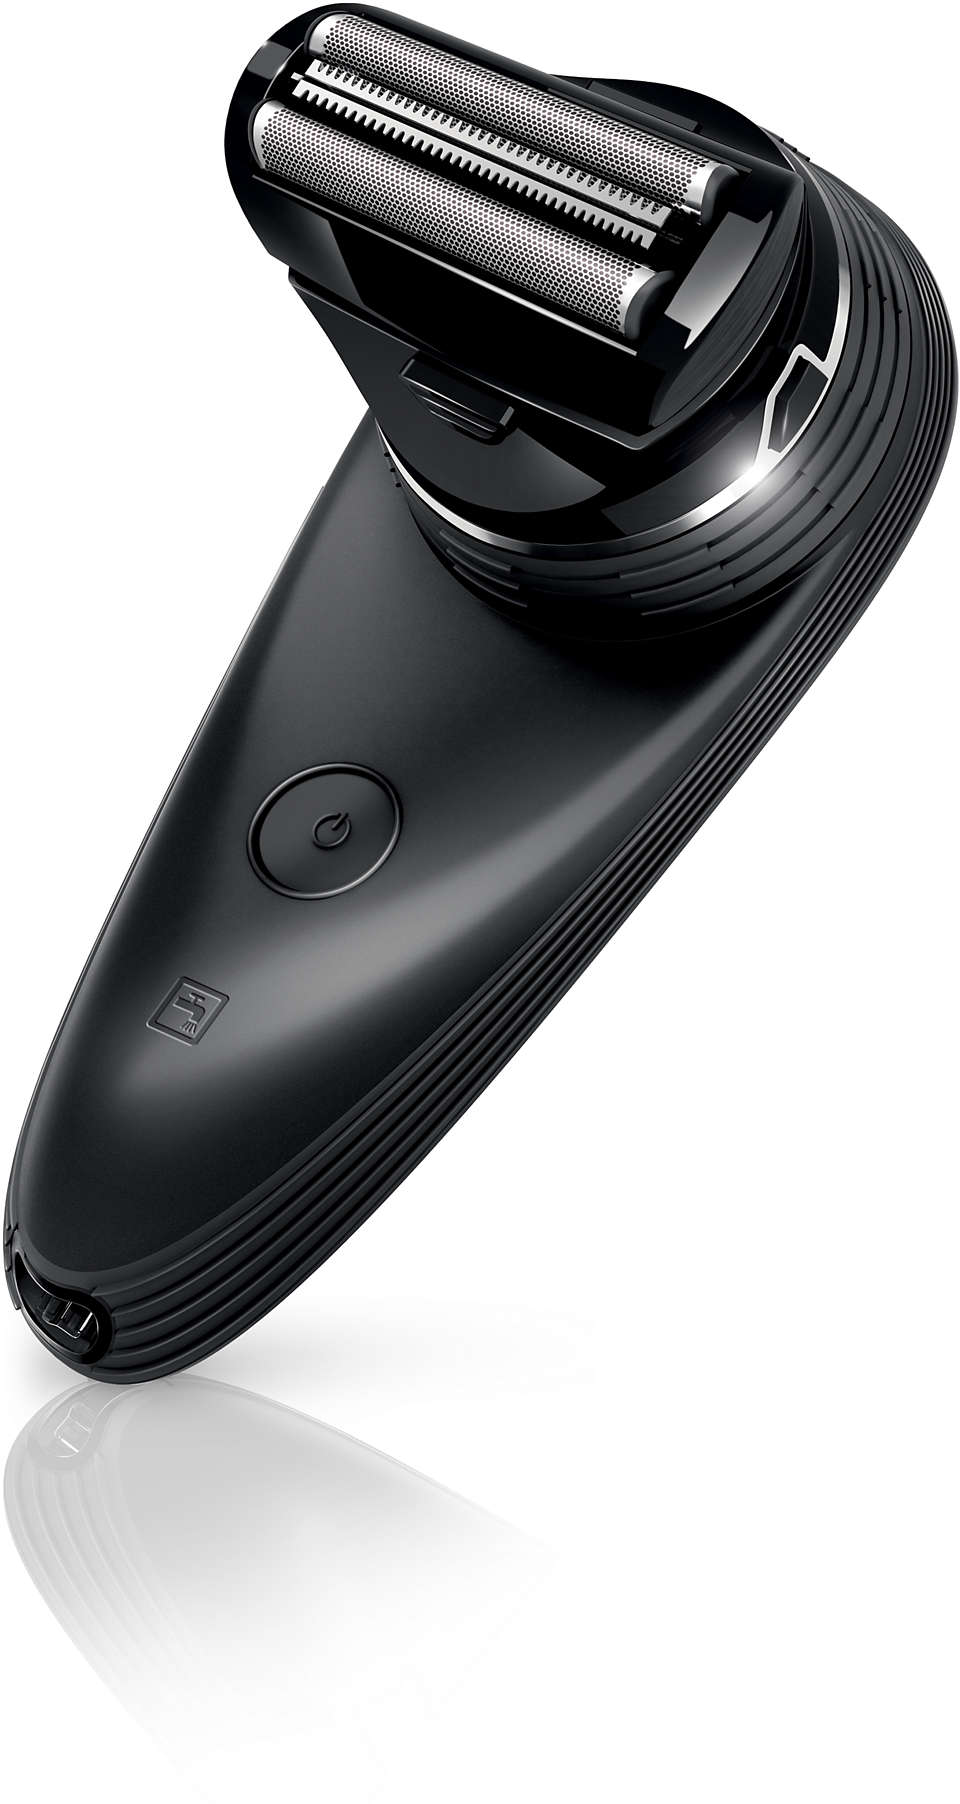 do-it-yourself hair clipper QC5550/15 | Philips